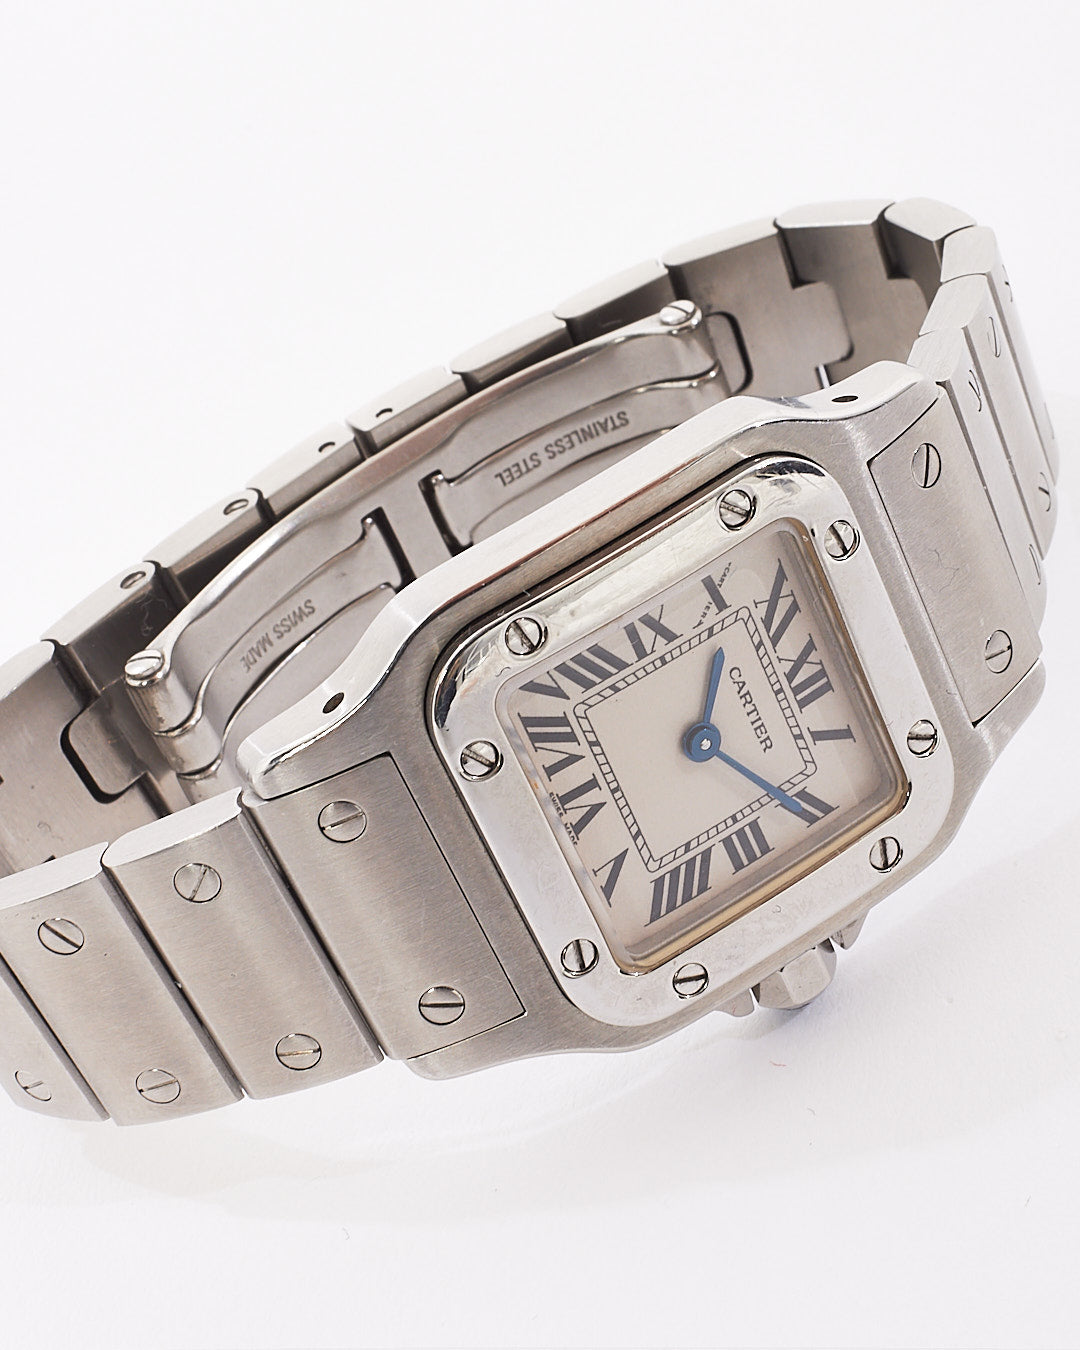 Cartier Stainless Steel Small Santos Watch